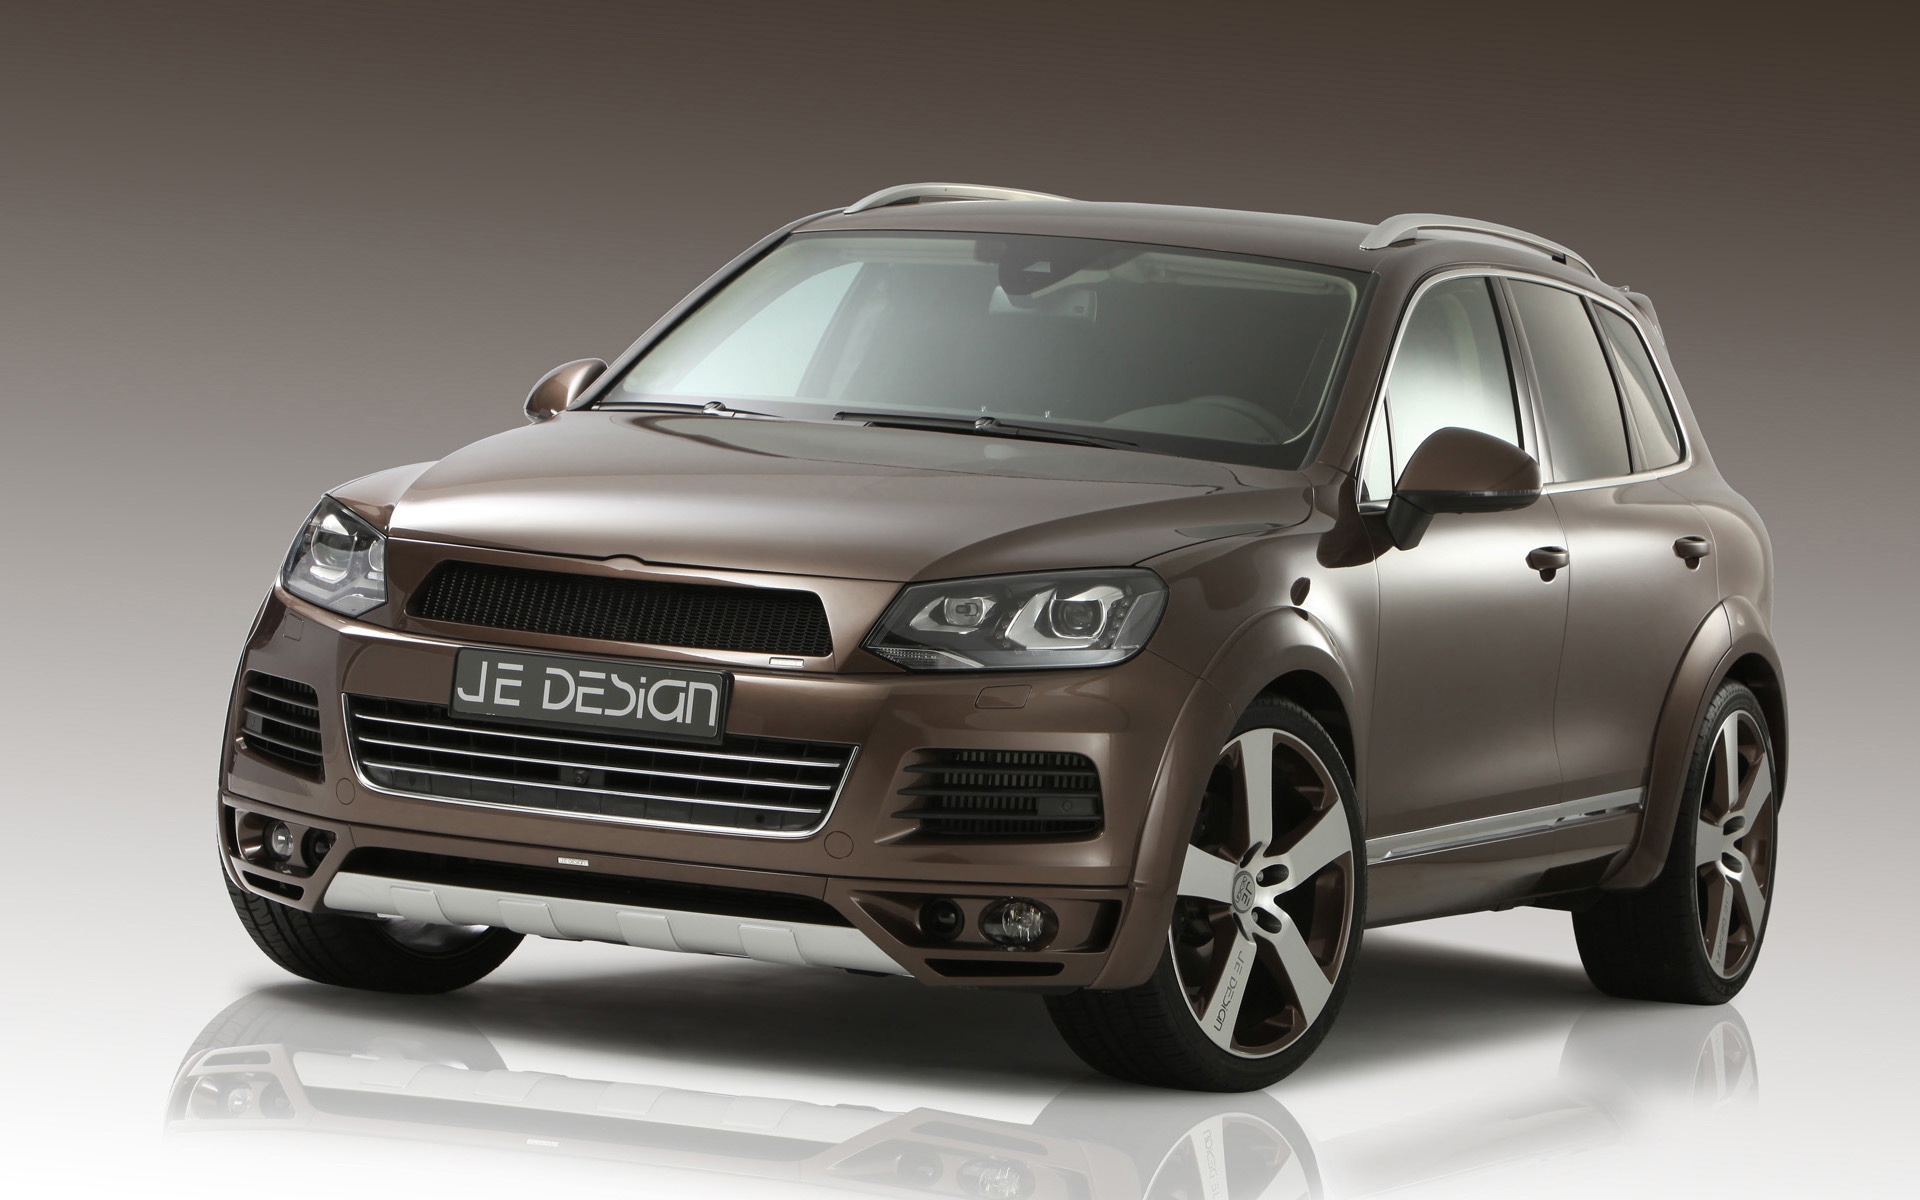 JE Design Volkswagen Touareg Front Angle for 1920 x 1200 widescreen resolution